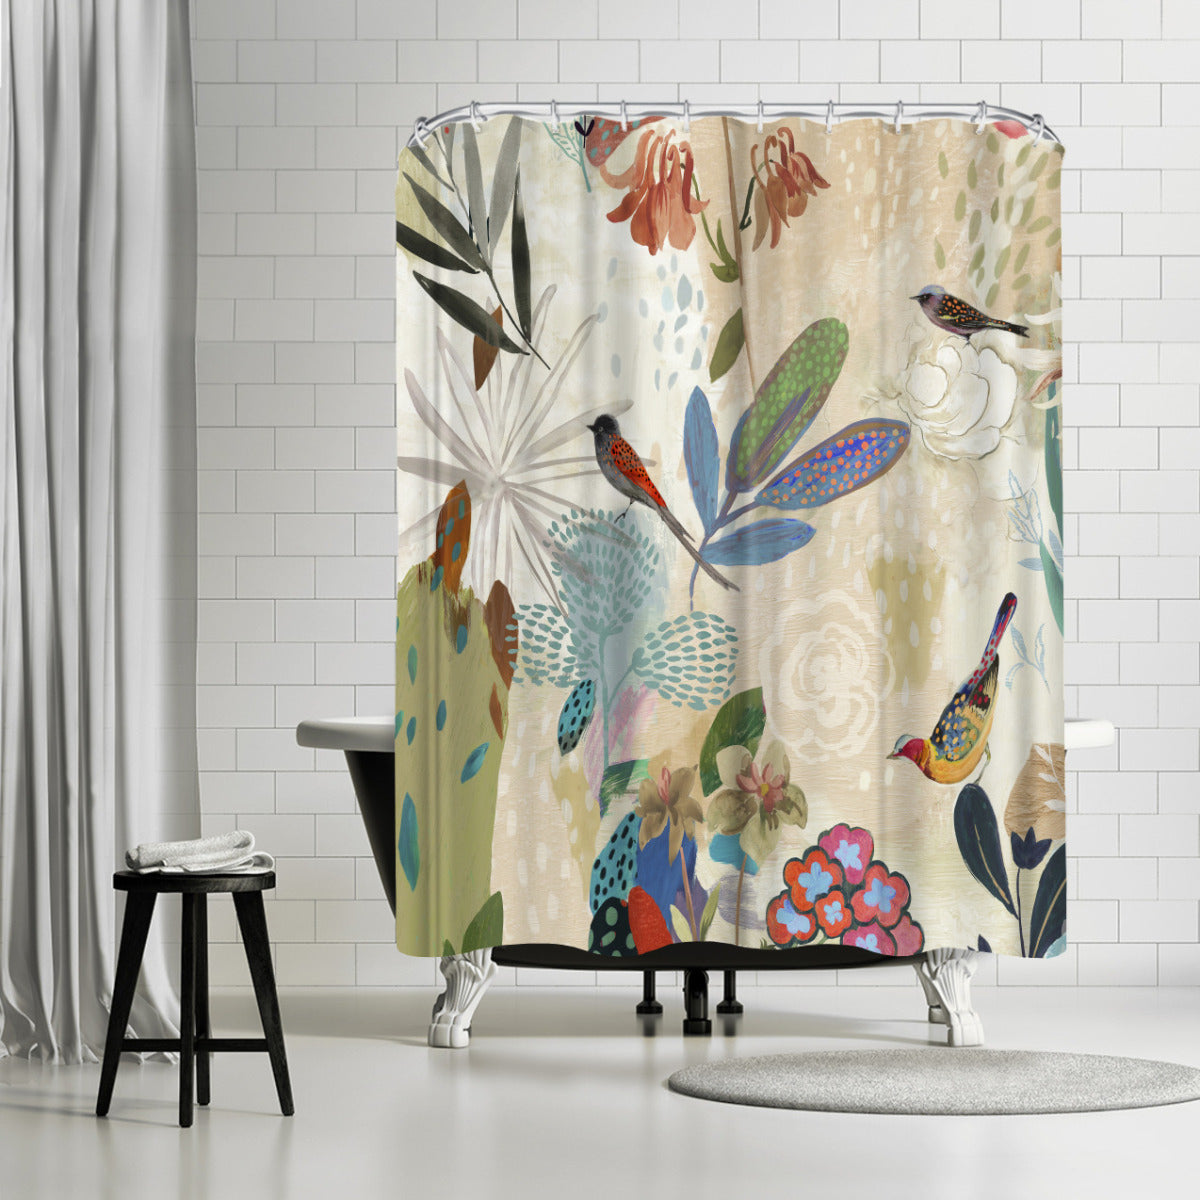 71" x 74" Abstract Shower Curtain with 12 Hooks, Where The Passion Flower Grows I by PI Creative Art